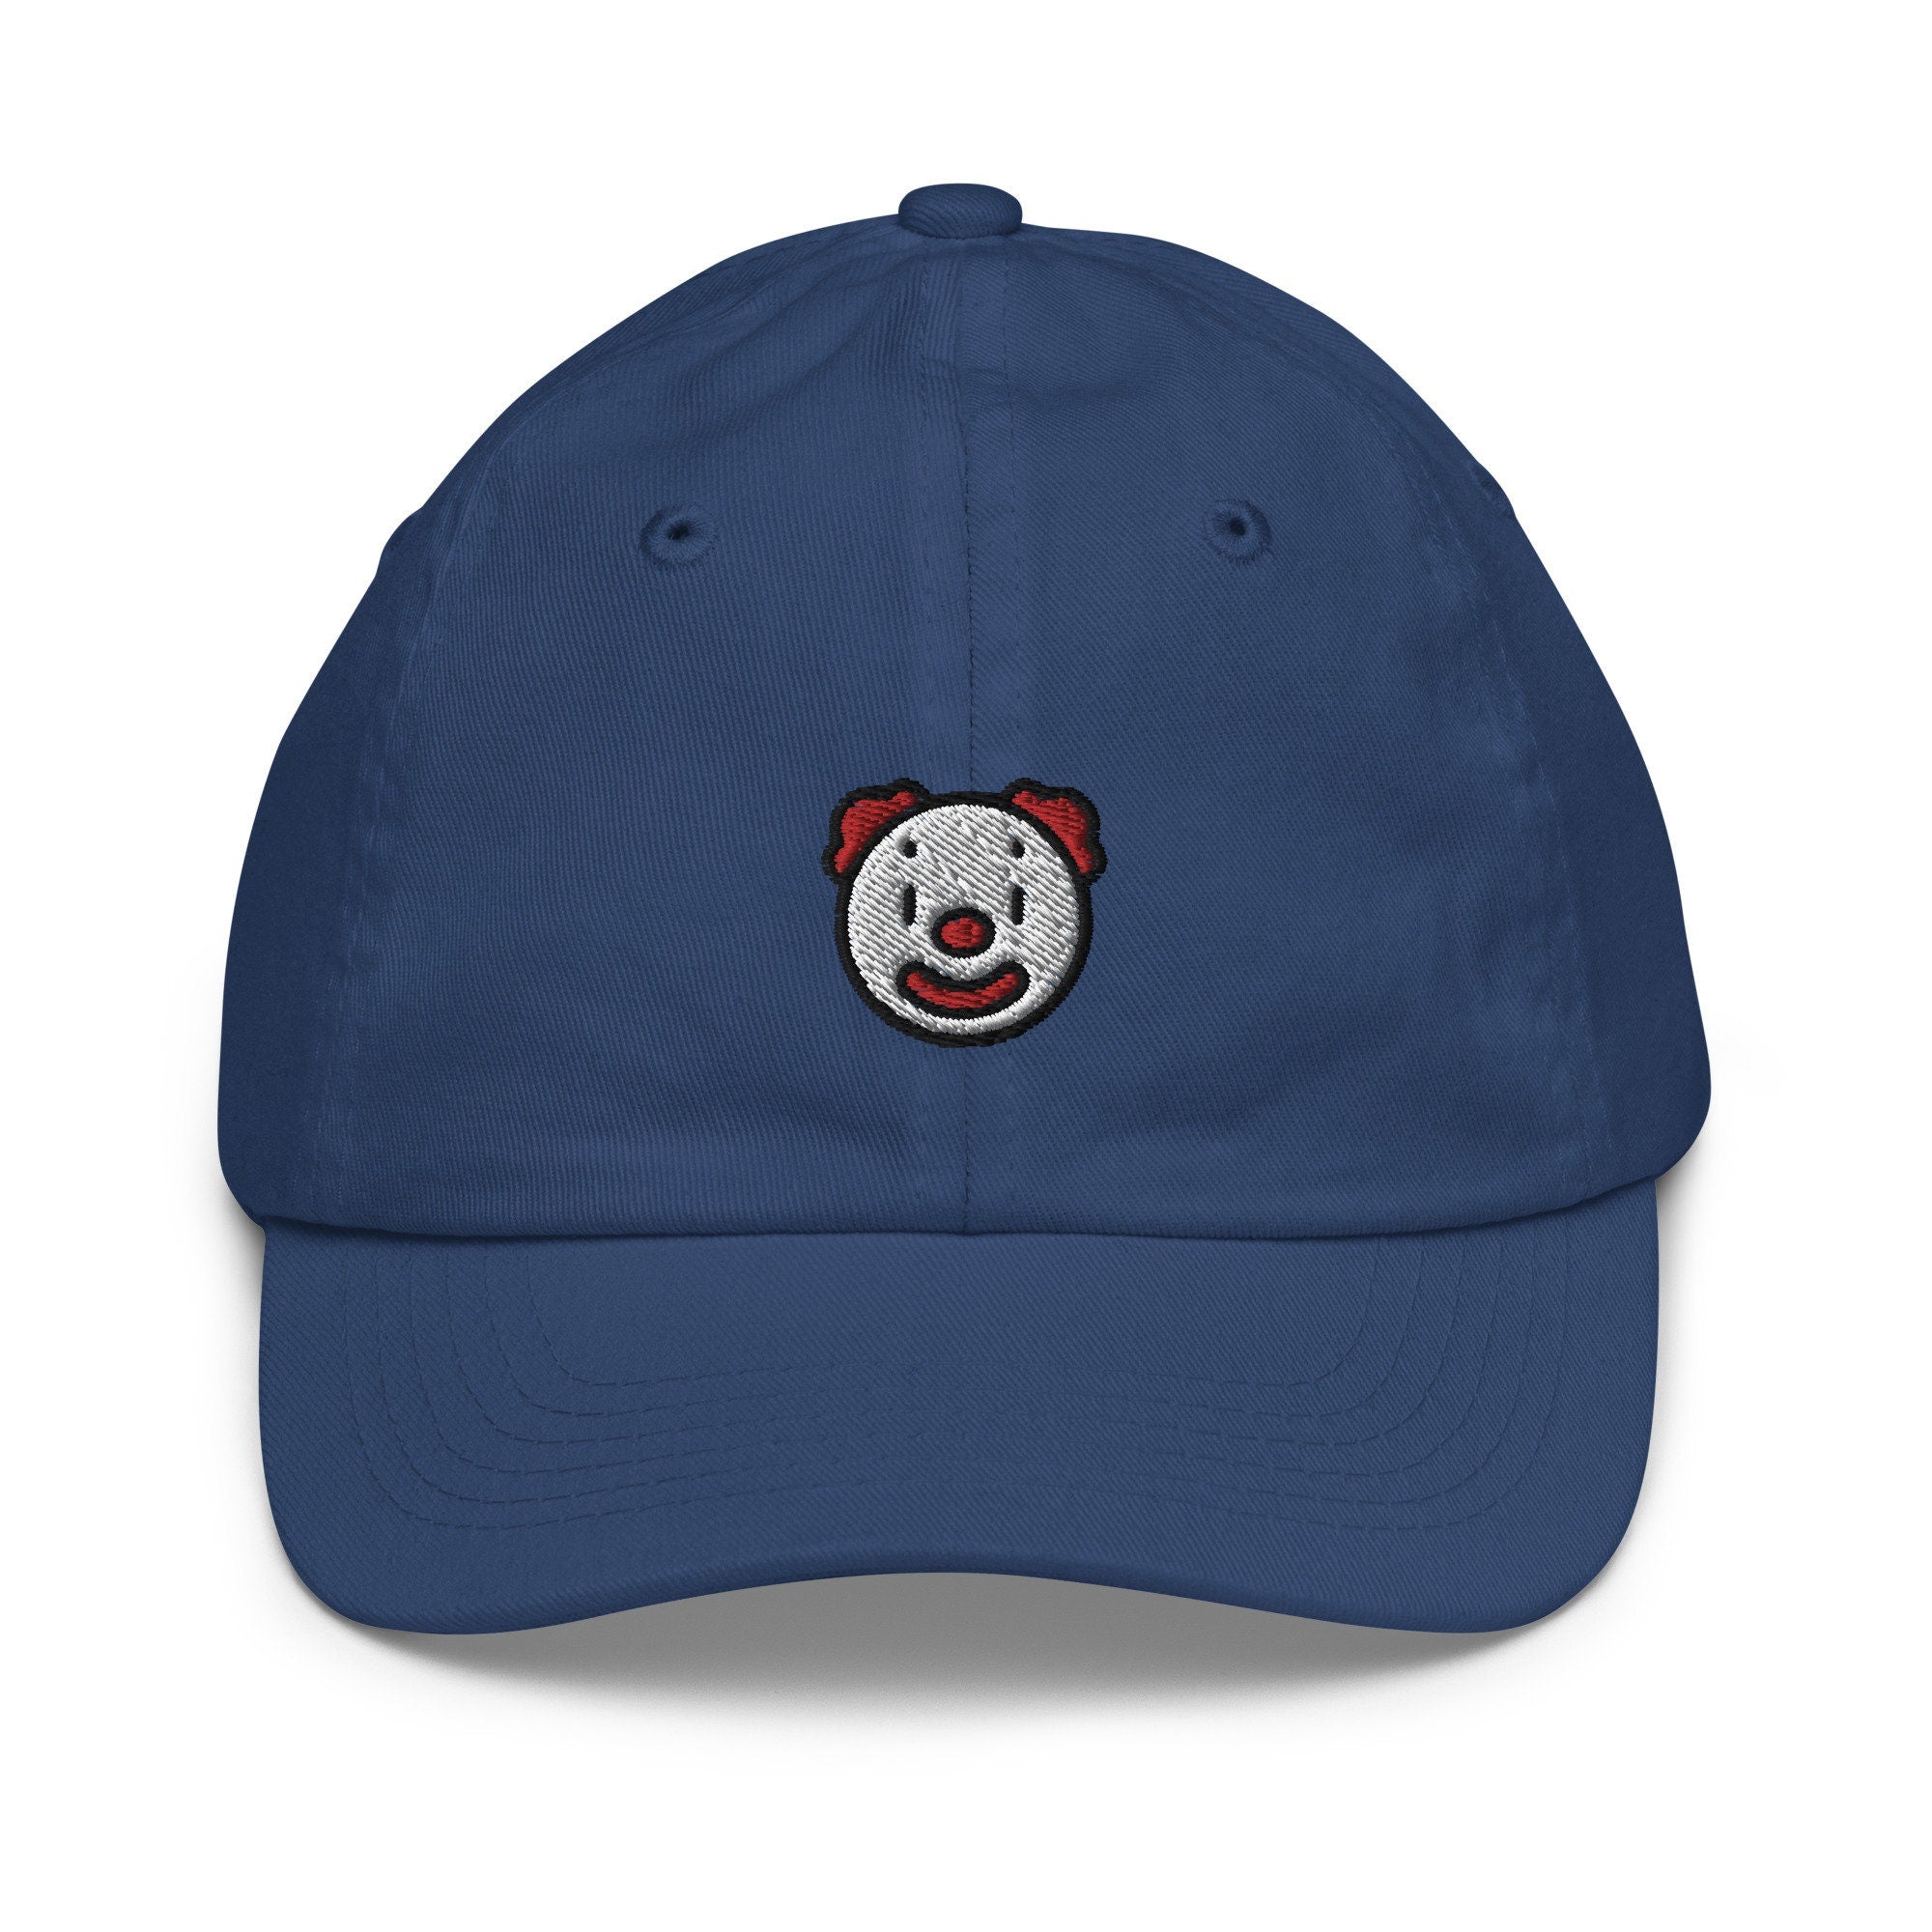 Clown Emoji Youth Baseball Cap, Handmade Kids Hat, Embroidered Childrens Hat Gift - Multiple Colors